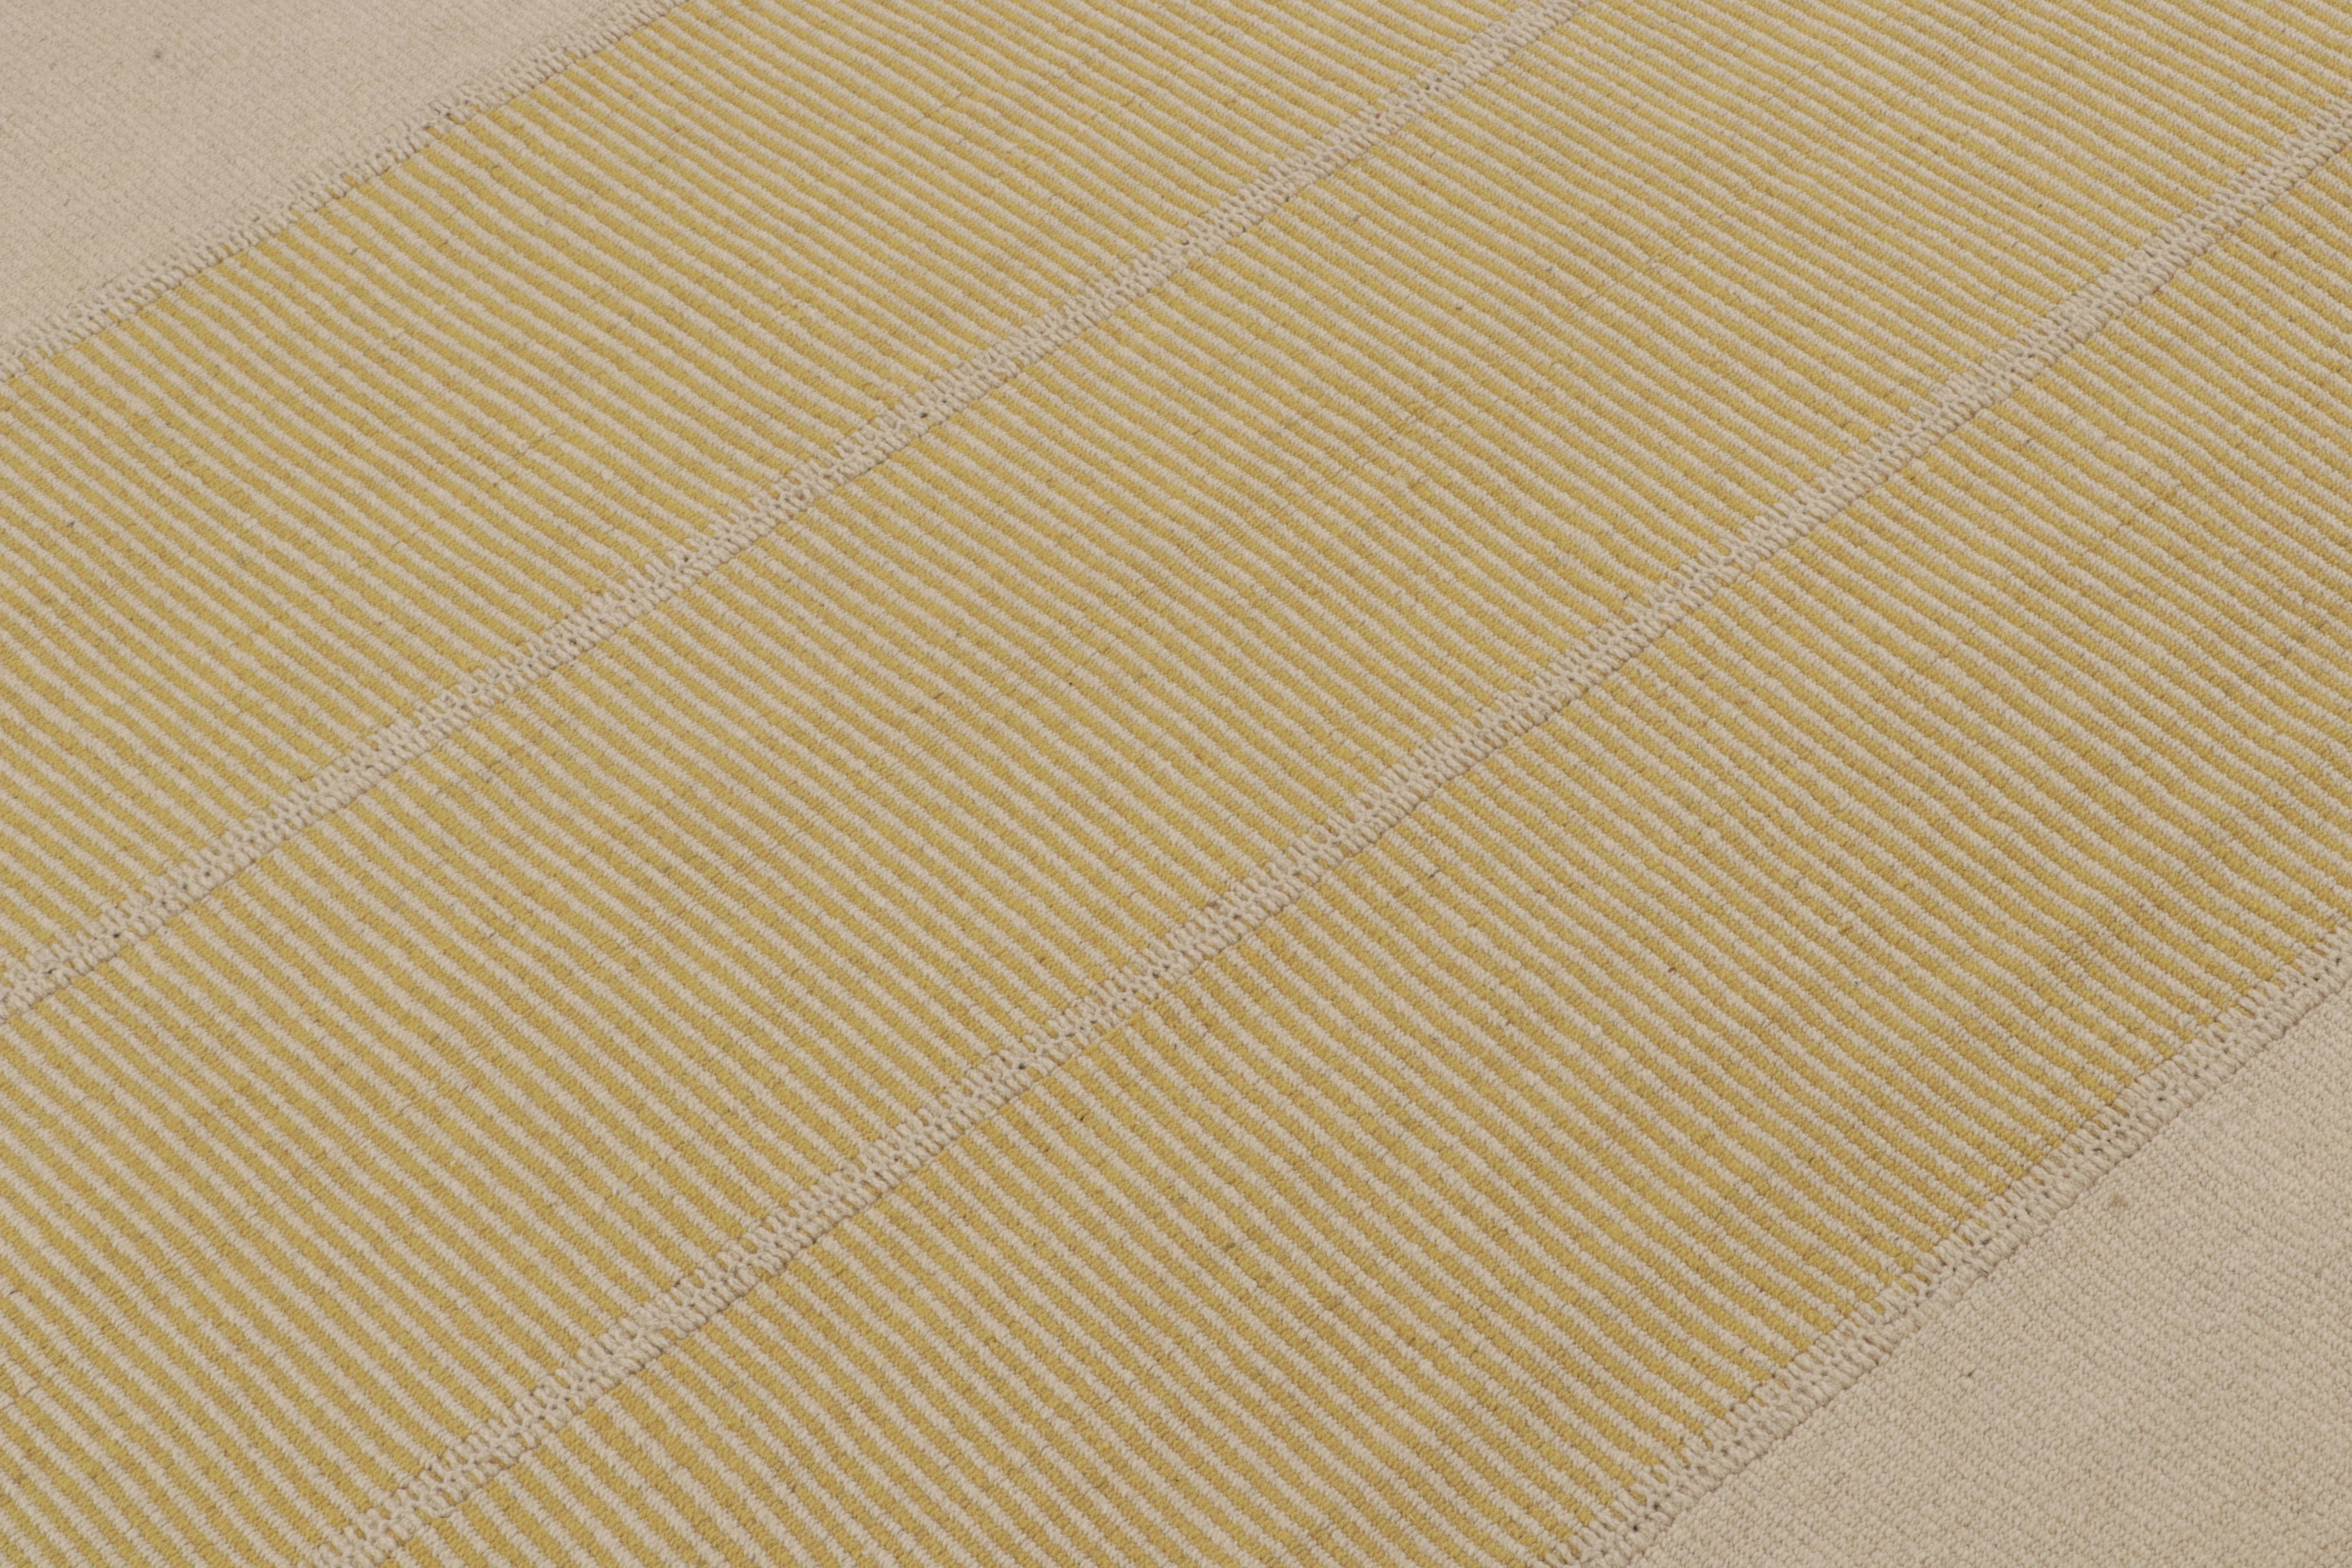 Handwoven in wool, an 8x10 Kilim from a bold new line of contemporary flatweaves by Rug & Kilim.

On the Design: 

Connoting a modern take on classic panel-weaving, our latest “Rez Kilim” enjoys beige & gold tones. Keen eyes will admire how this